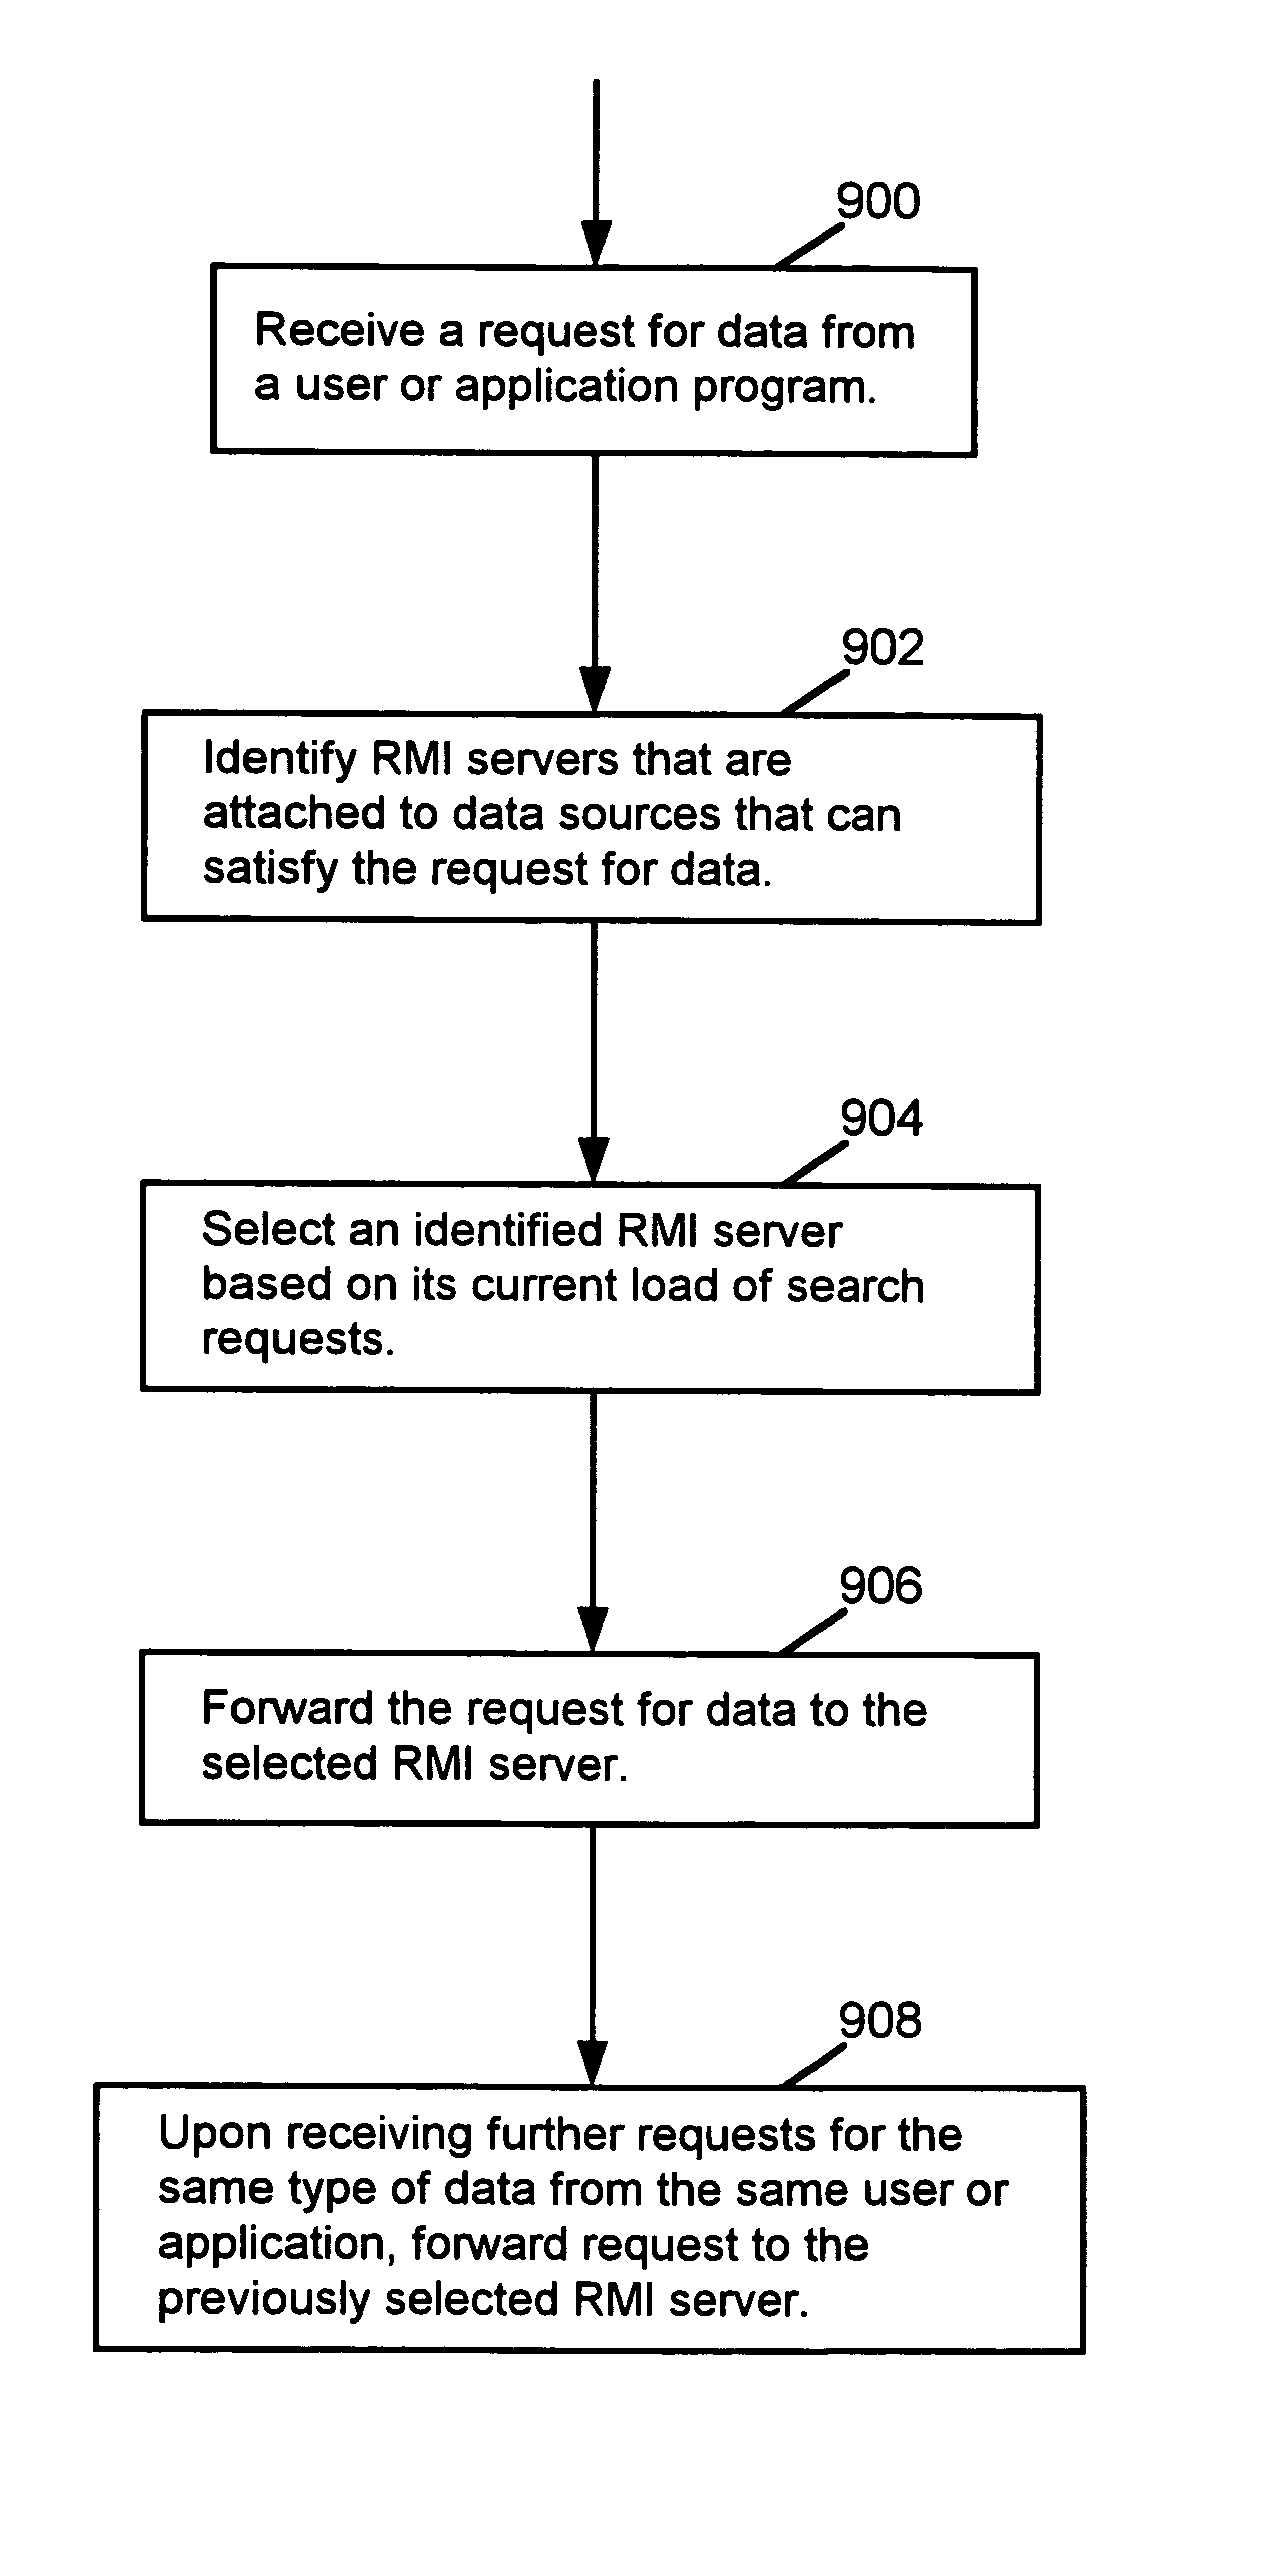 Architecture and implementation of a dynamic RMI server configuration hierarchy to support federated search and update across heterogeneous datastores